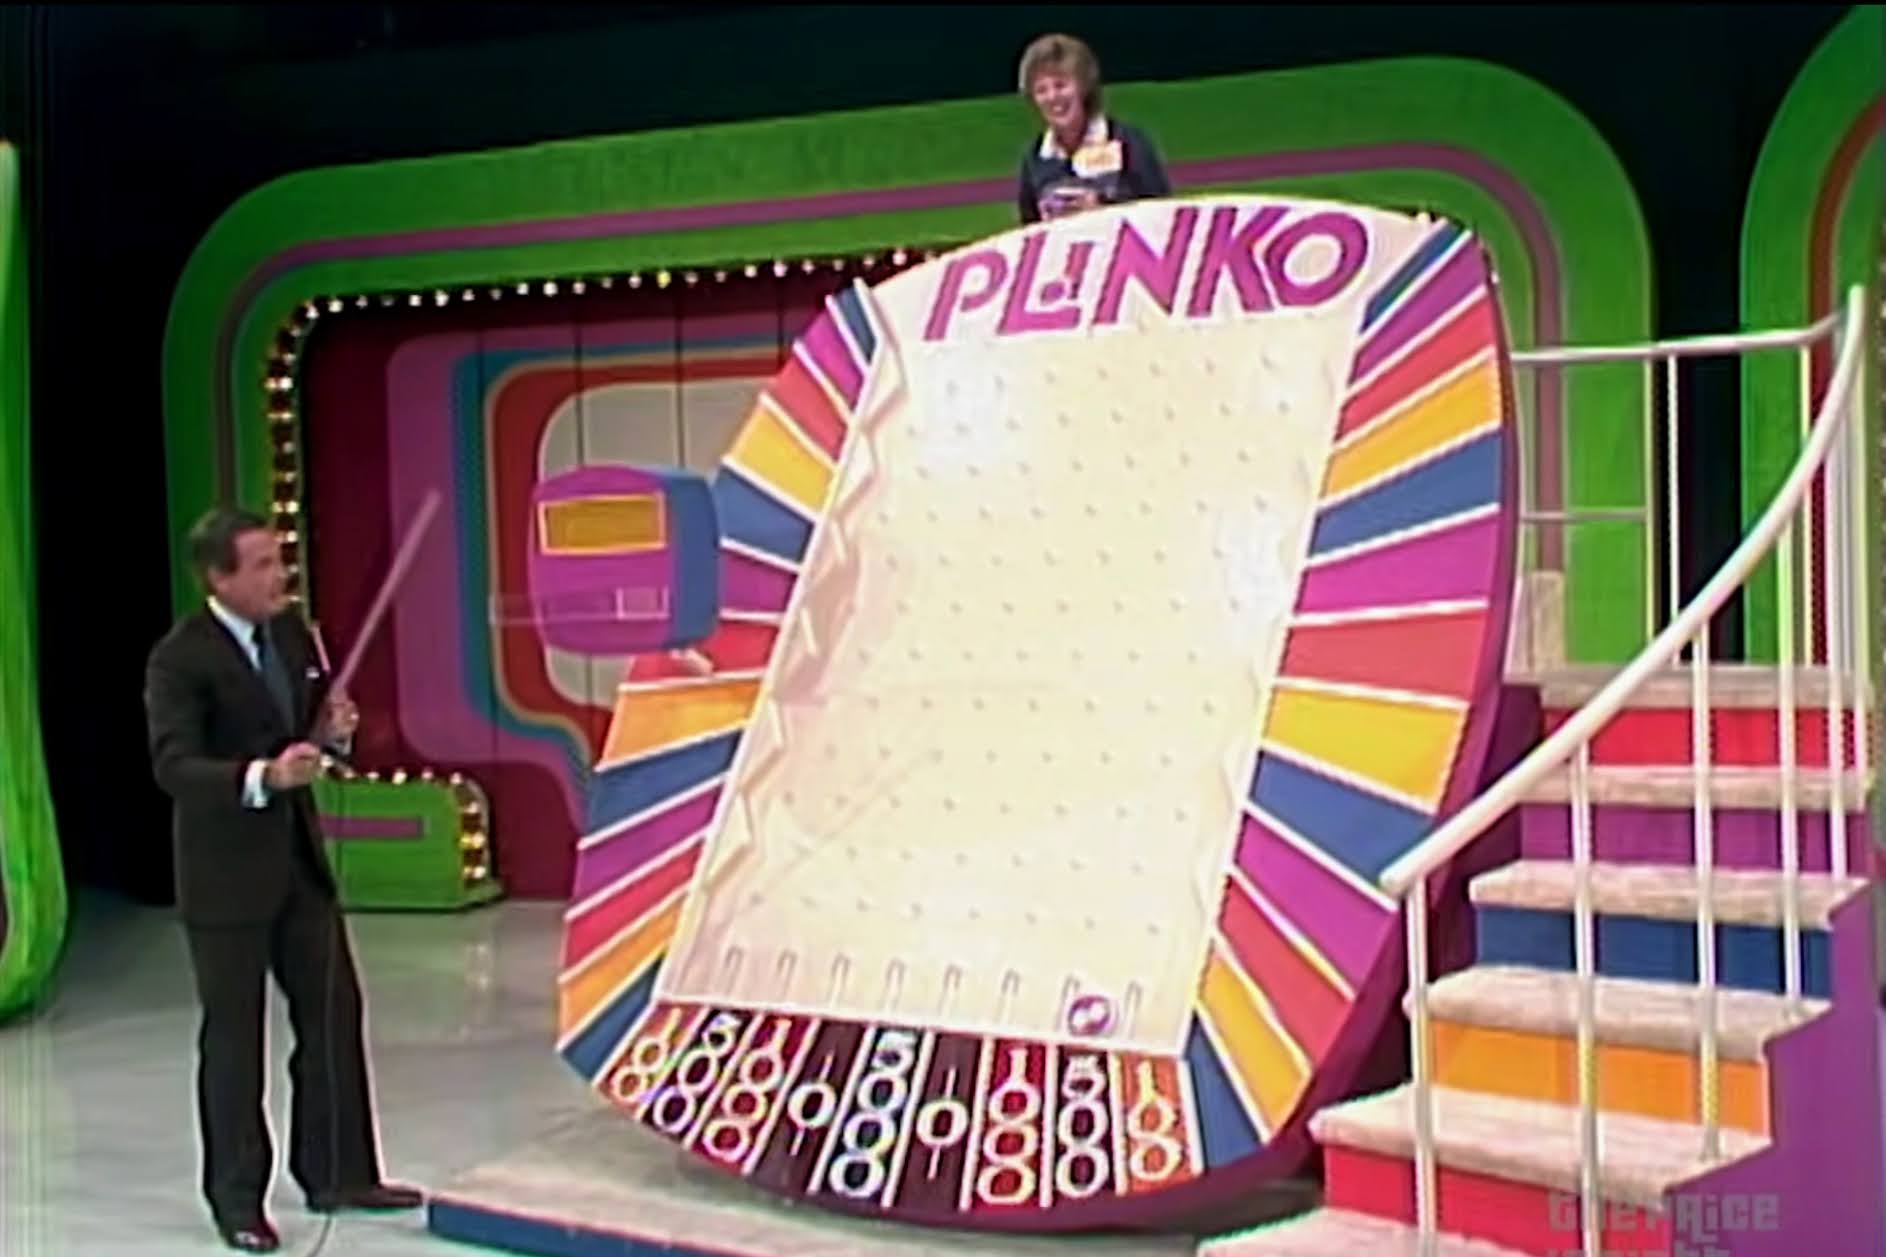 A Plinko board, which is what my life organization system worked like.